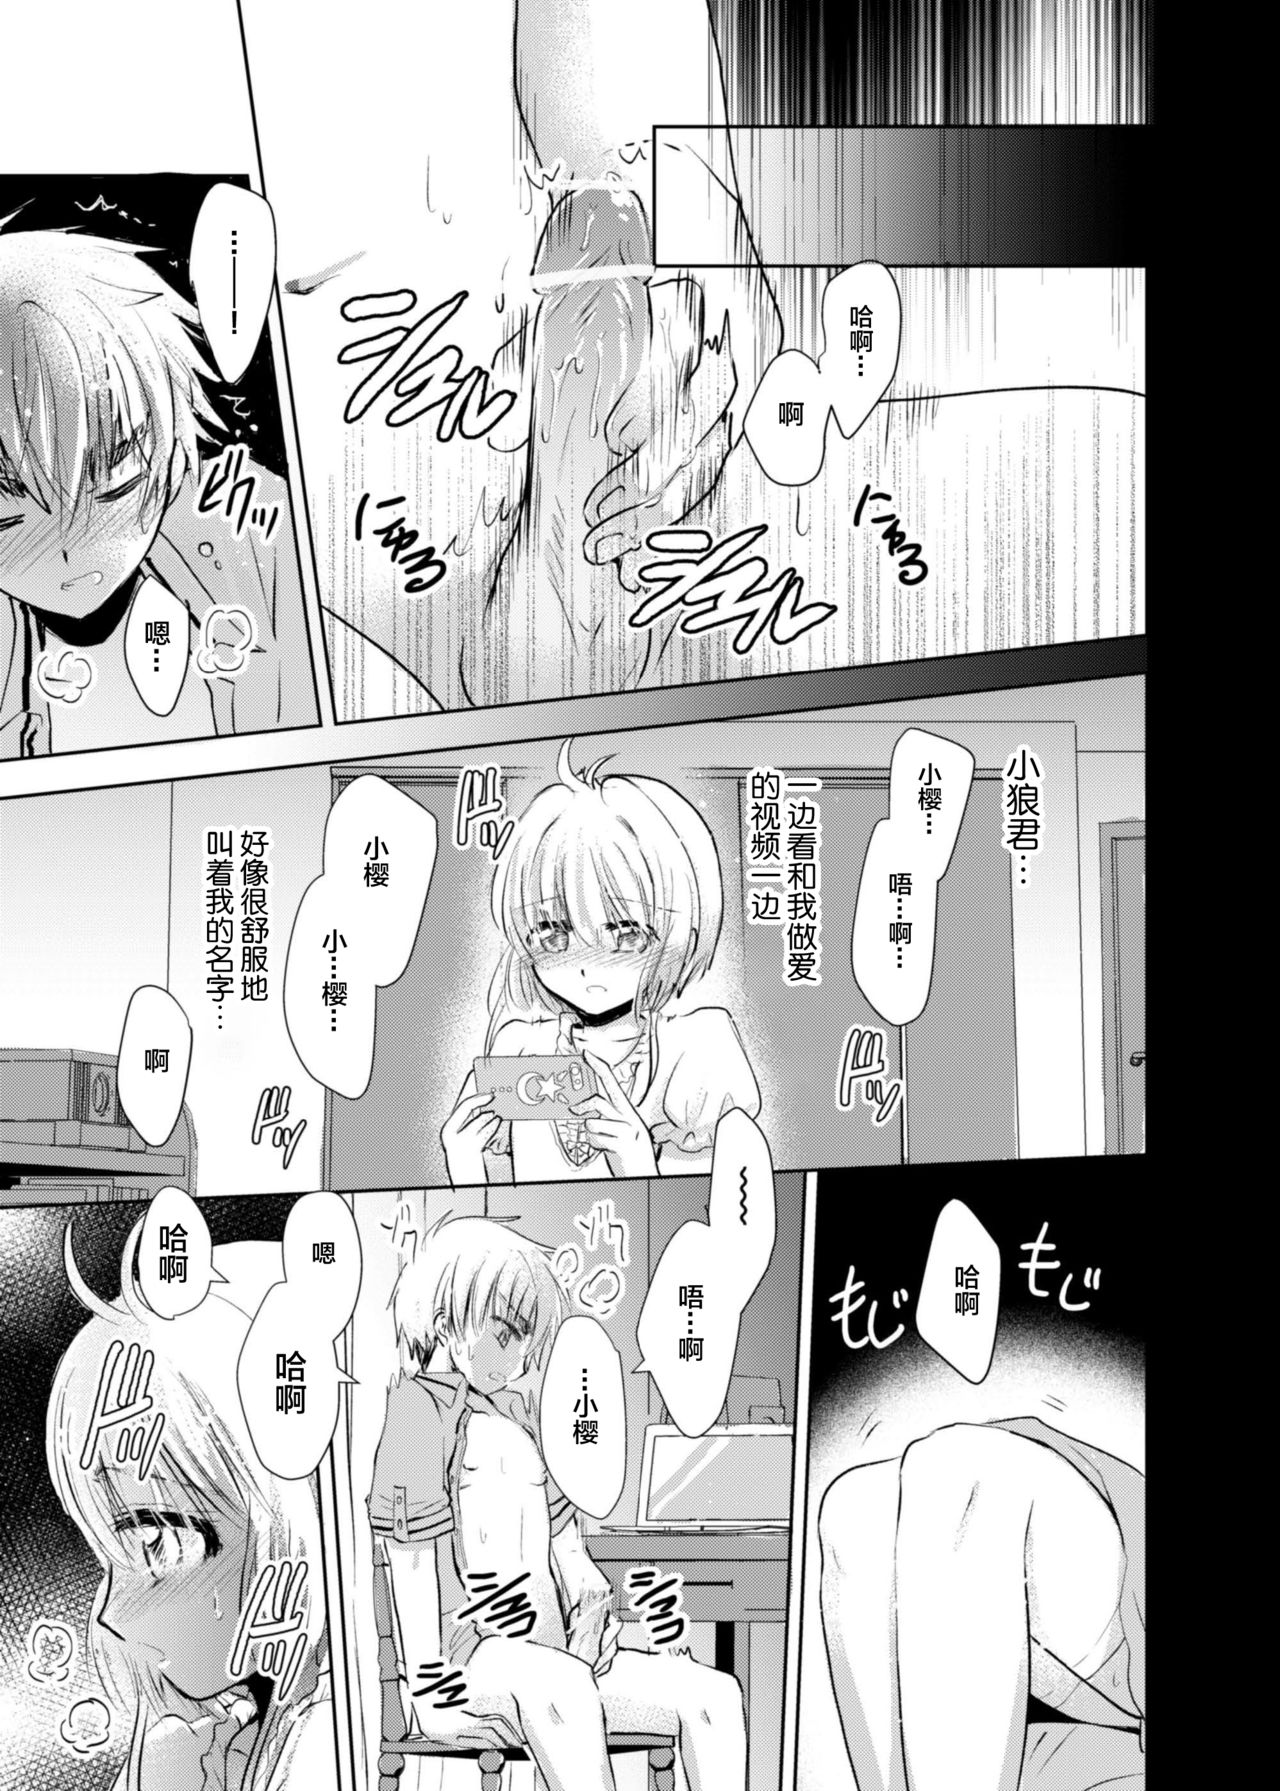 [Maple of Forest (Kaede Sago)] Give and Take (Cardcaptor Sakura) [Chinese] [新桥月白日语社] [Digital] page 18 full